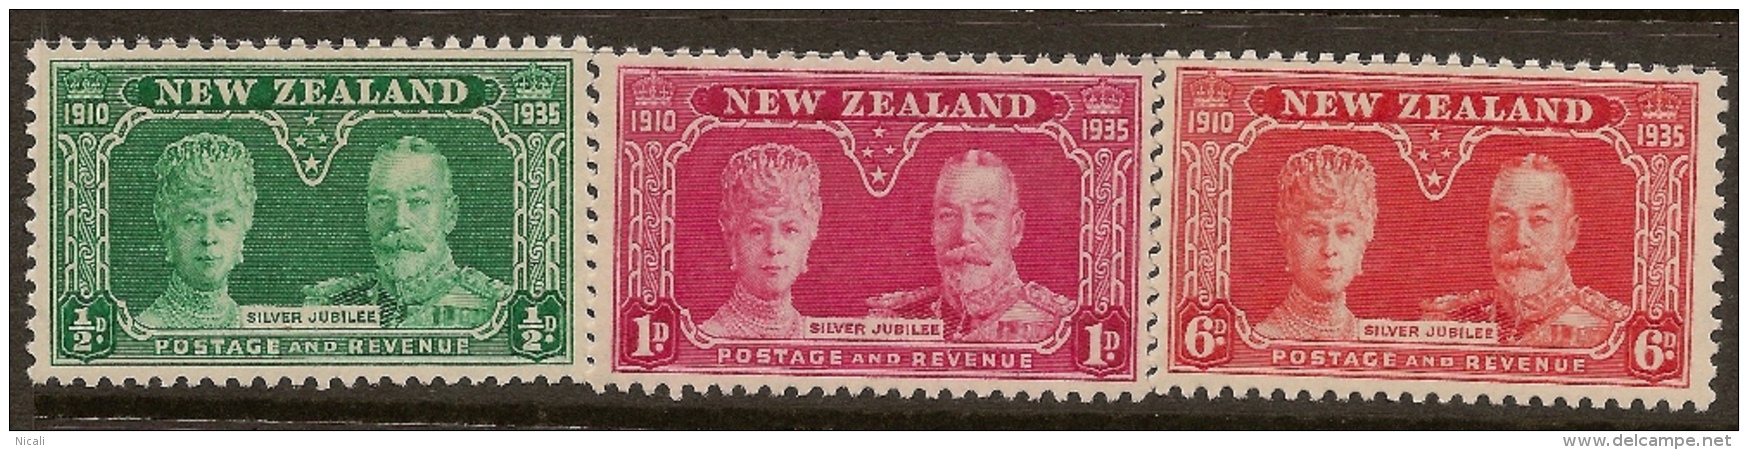 NZ 1935 Silver Jubilee SG 573-5 UNHM #XJ41 - Unused Stamps